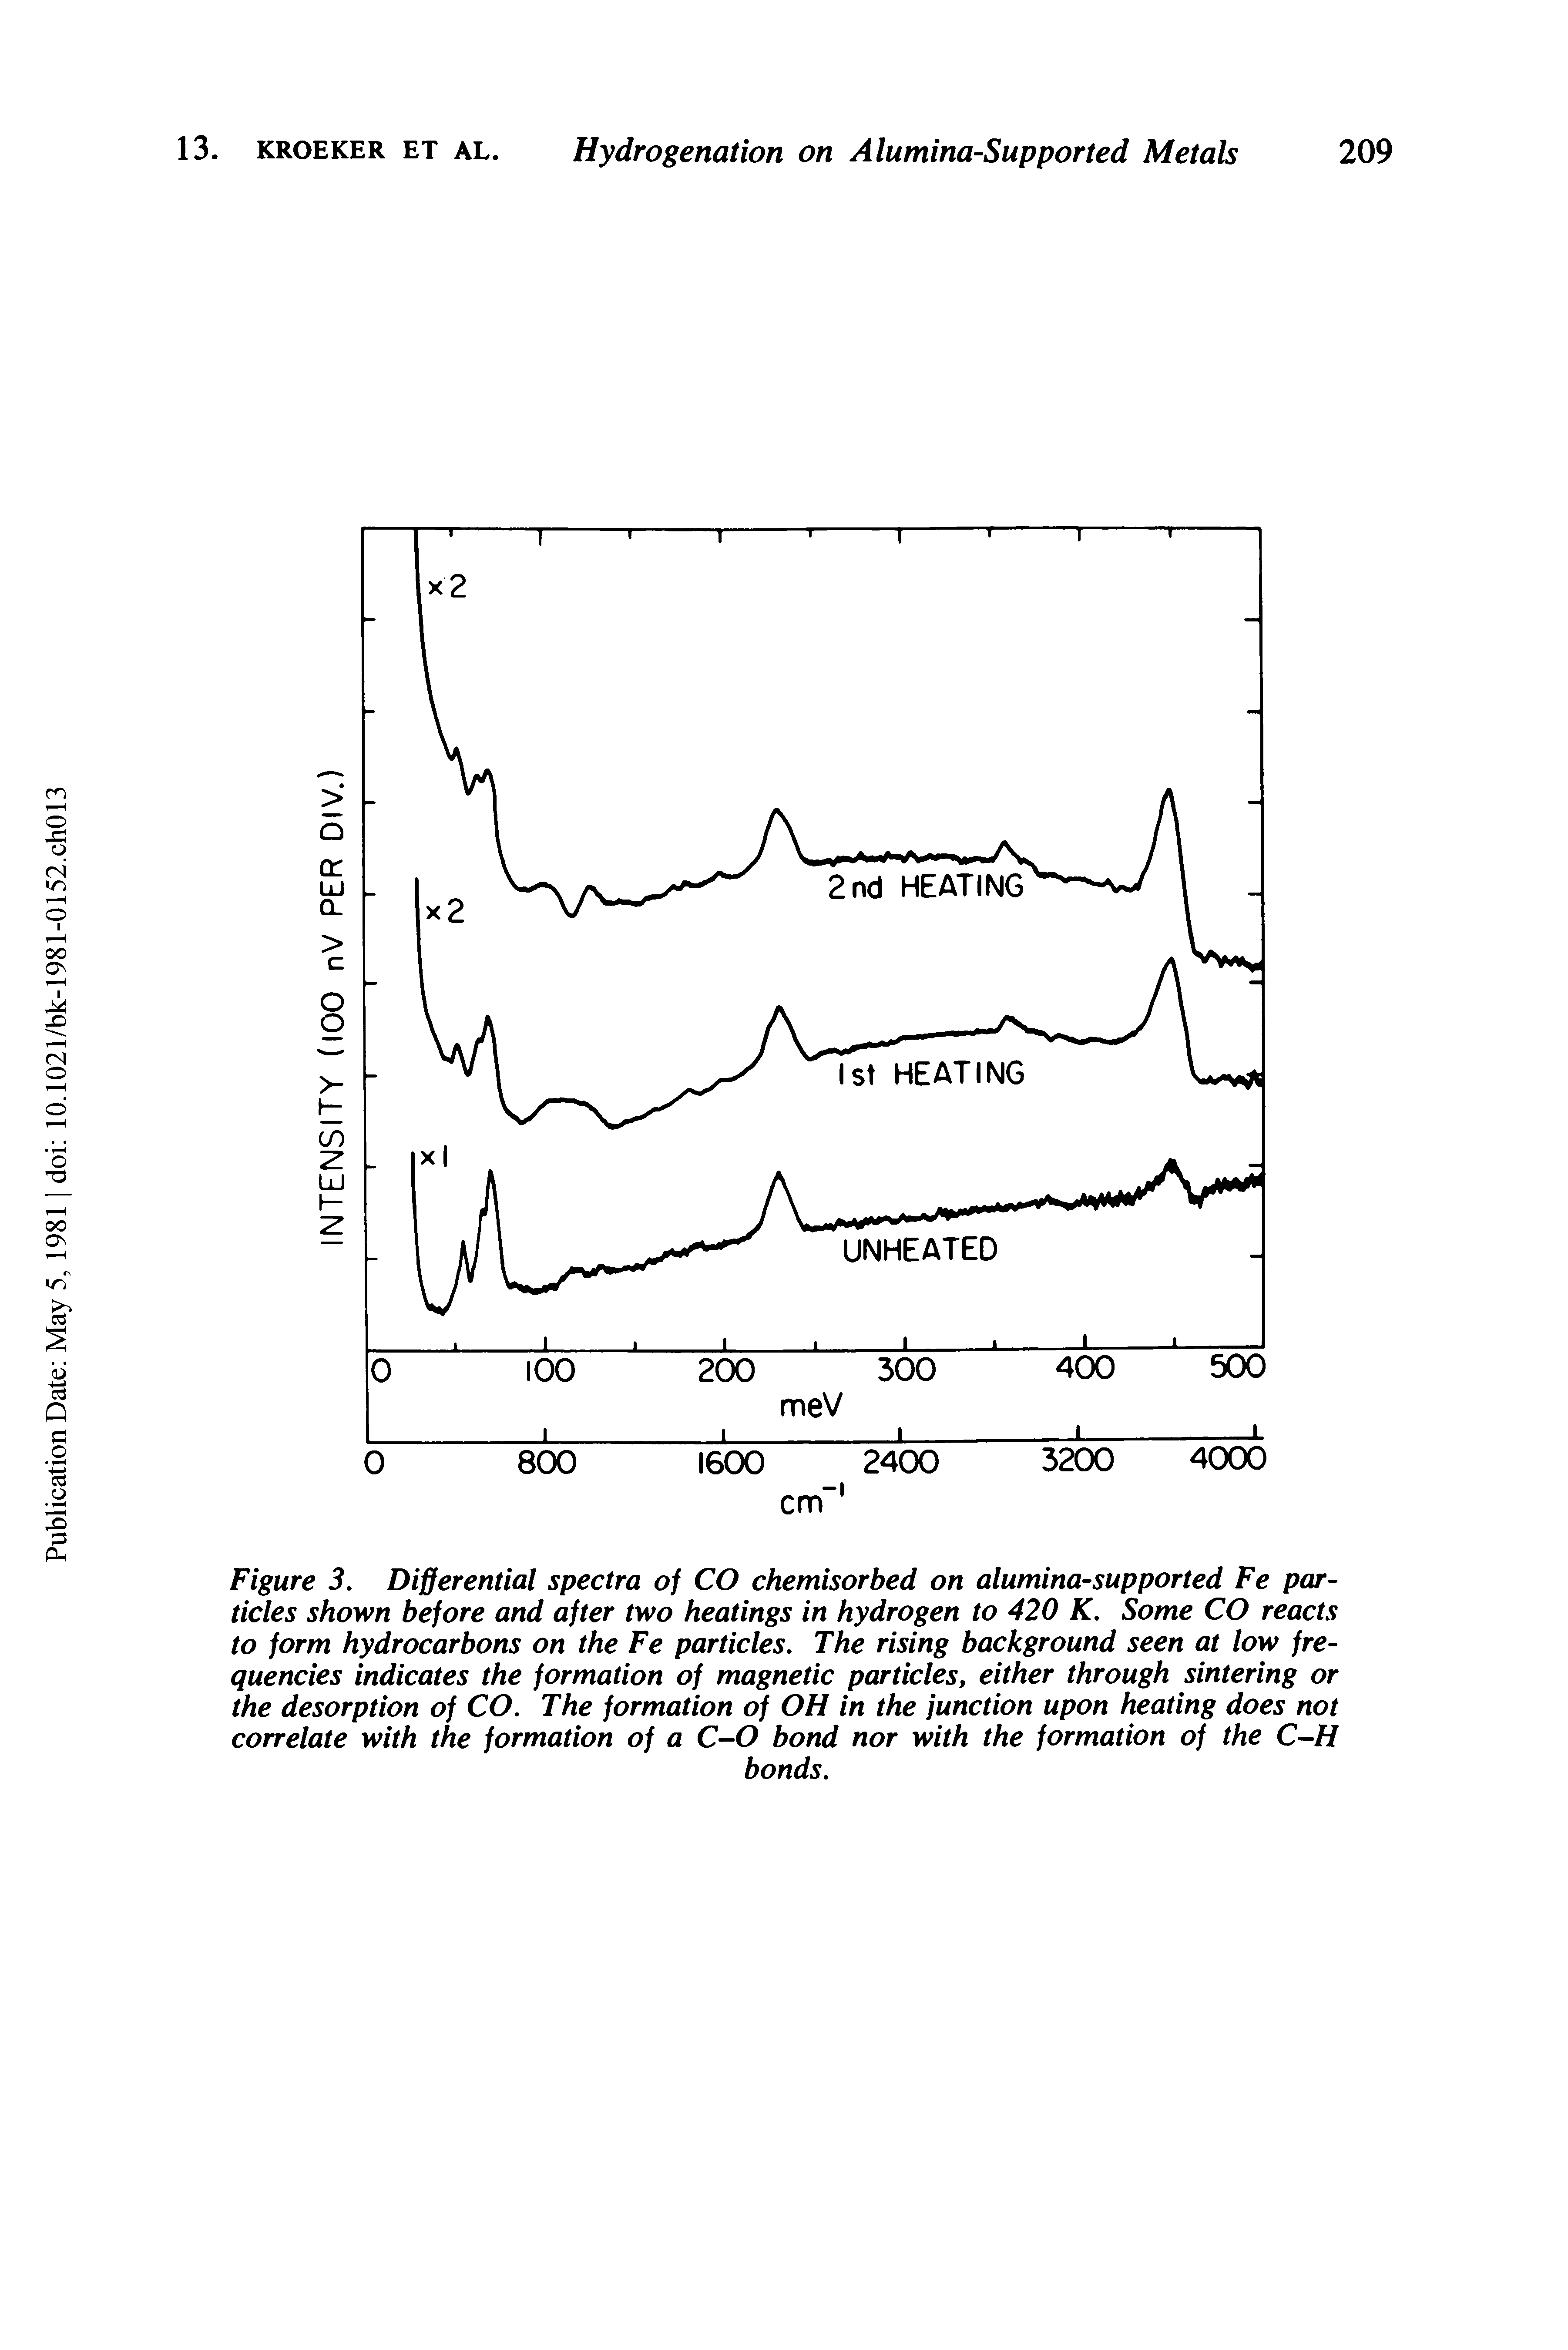 Figure 3. Differential spectra of CO chemisorbed on alumina-supported Fe particles shown before and after two heatings in hydrogen to 420 K. Some CO reacts to form hydrocarbons on the Fe particles. The rising background seen at low frequencies indicates the formation of magnetic particles, either through sintering or the desorption of CO. The formation of OH in the junction upon heating does not correlate with the formation of a C-O bond nor with the formation of the C-H...